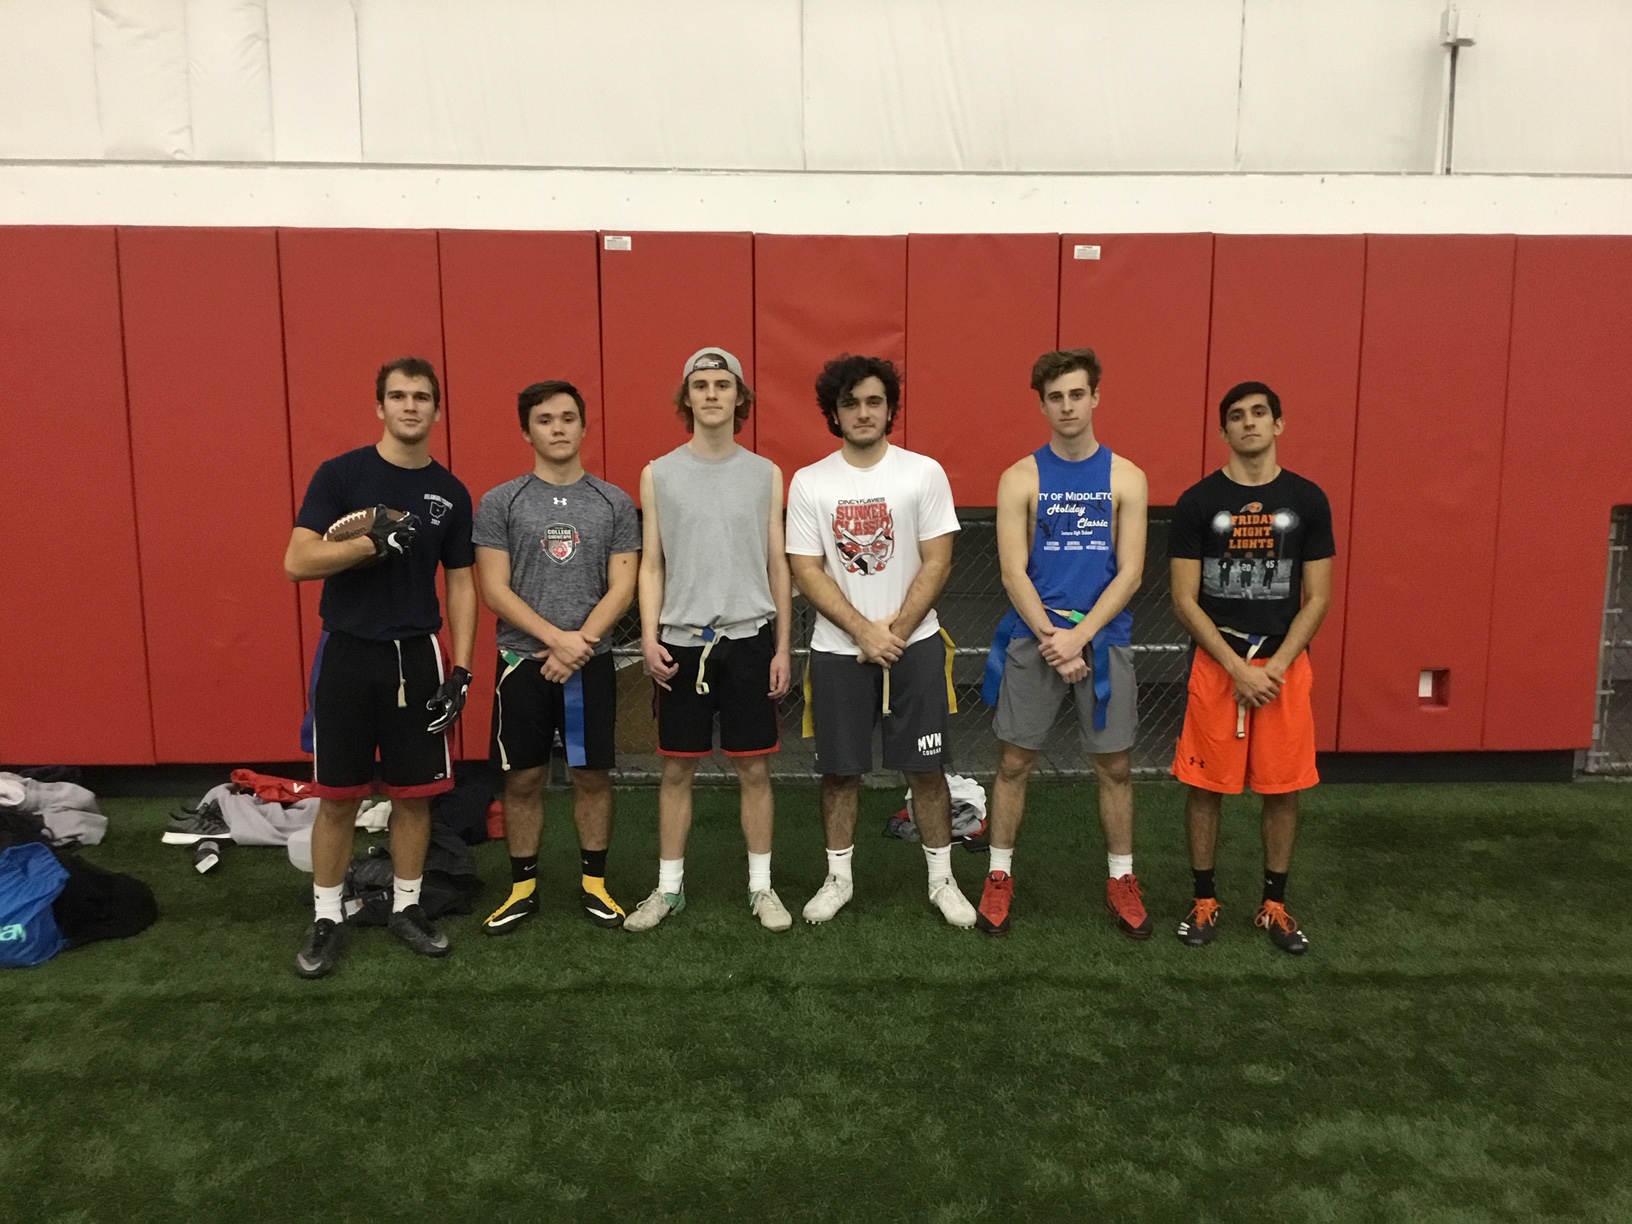 Arena Football runner up team poses on the indoor field with hands clasped at their waist wearing shirts and gym shorts.